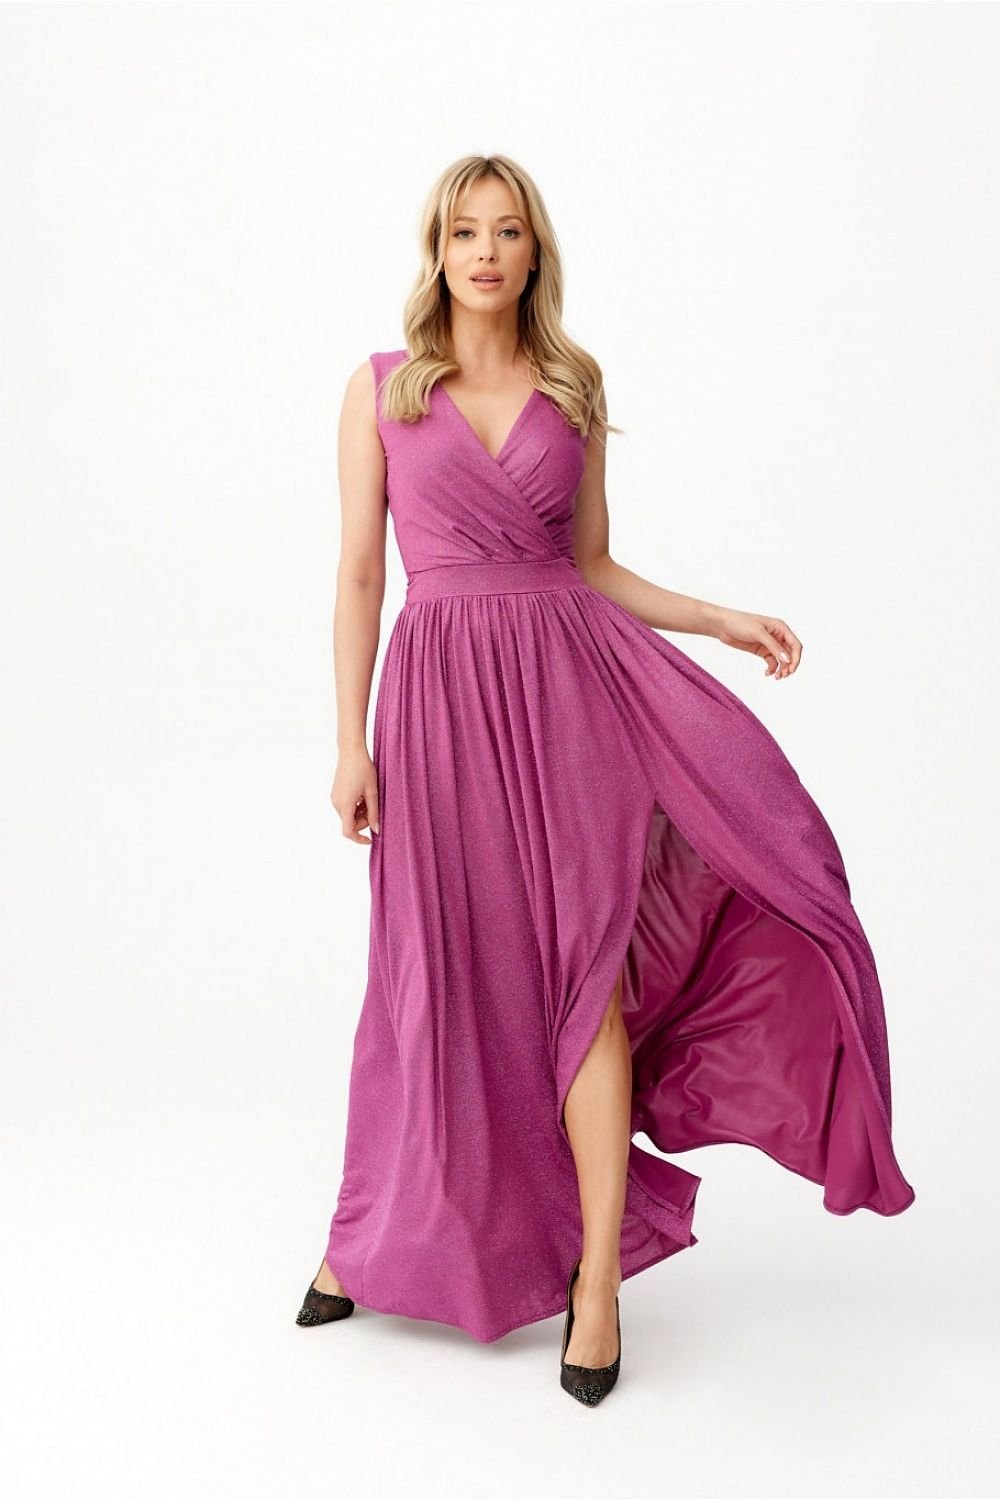 Brocade Violet Long Maxi Dress With A Tie Sleeveless Evening Dresses